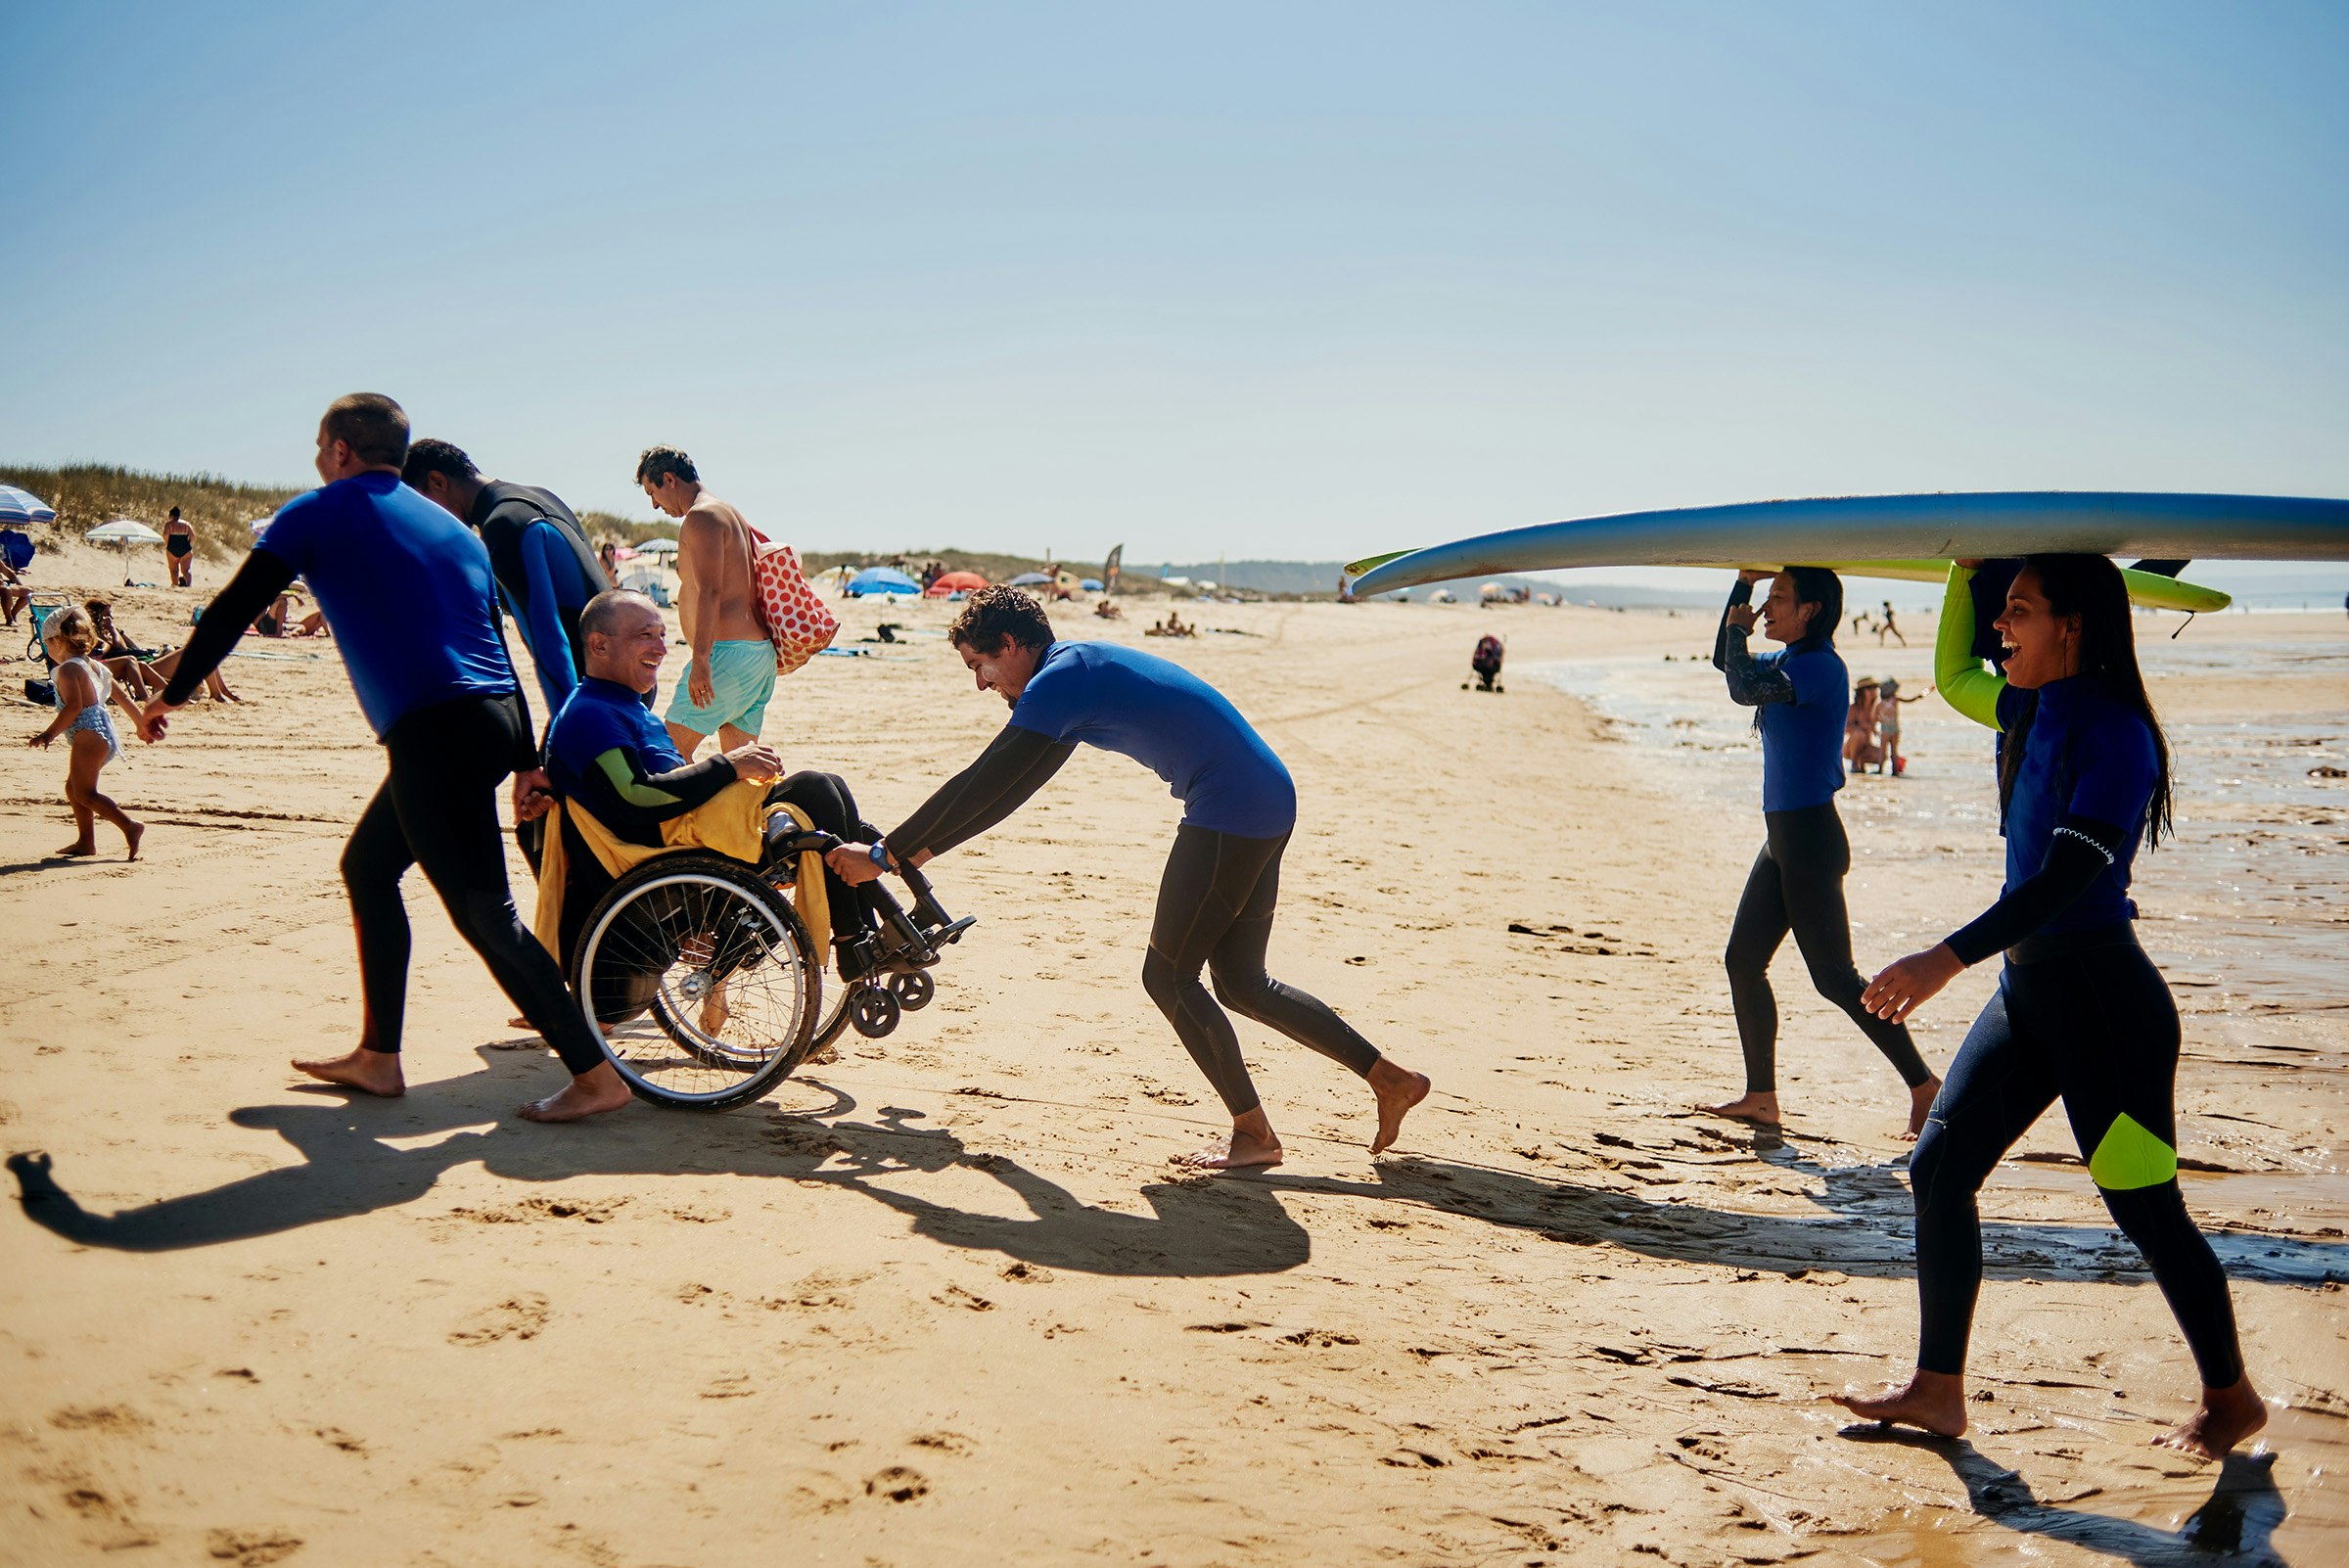 A group of people smiling on a beach with surfboards, one man is in a wheelchair